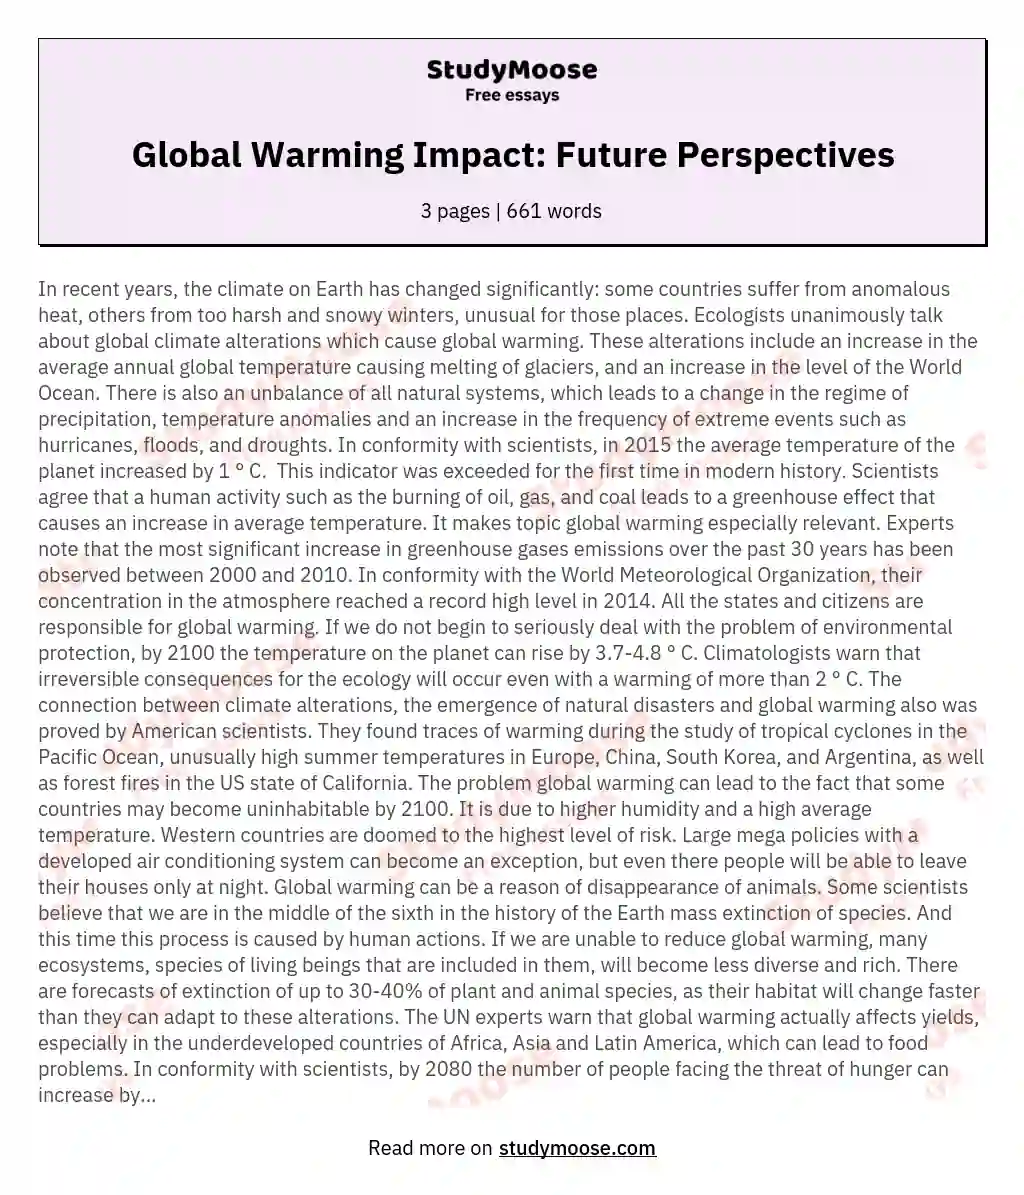 Global Warming Impact: Future Perspectives essay